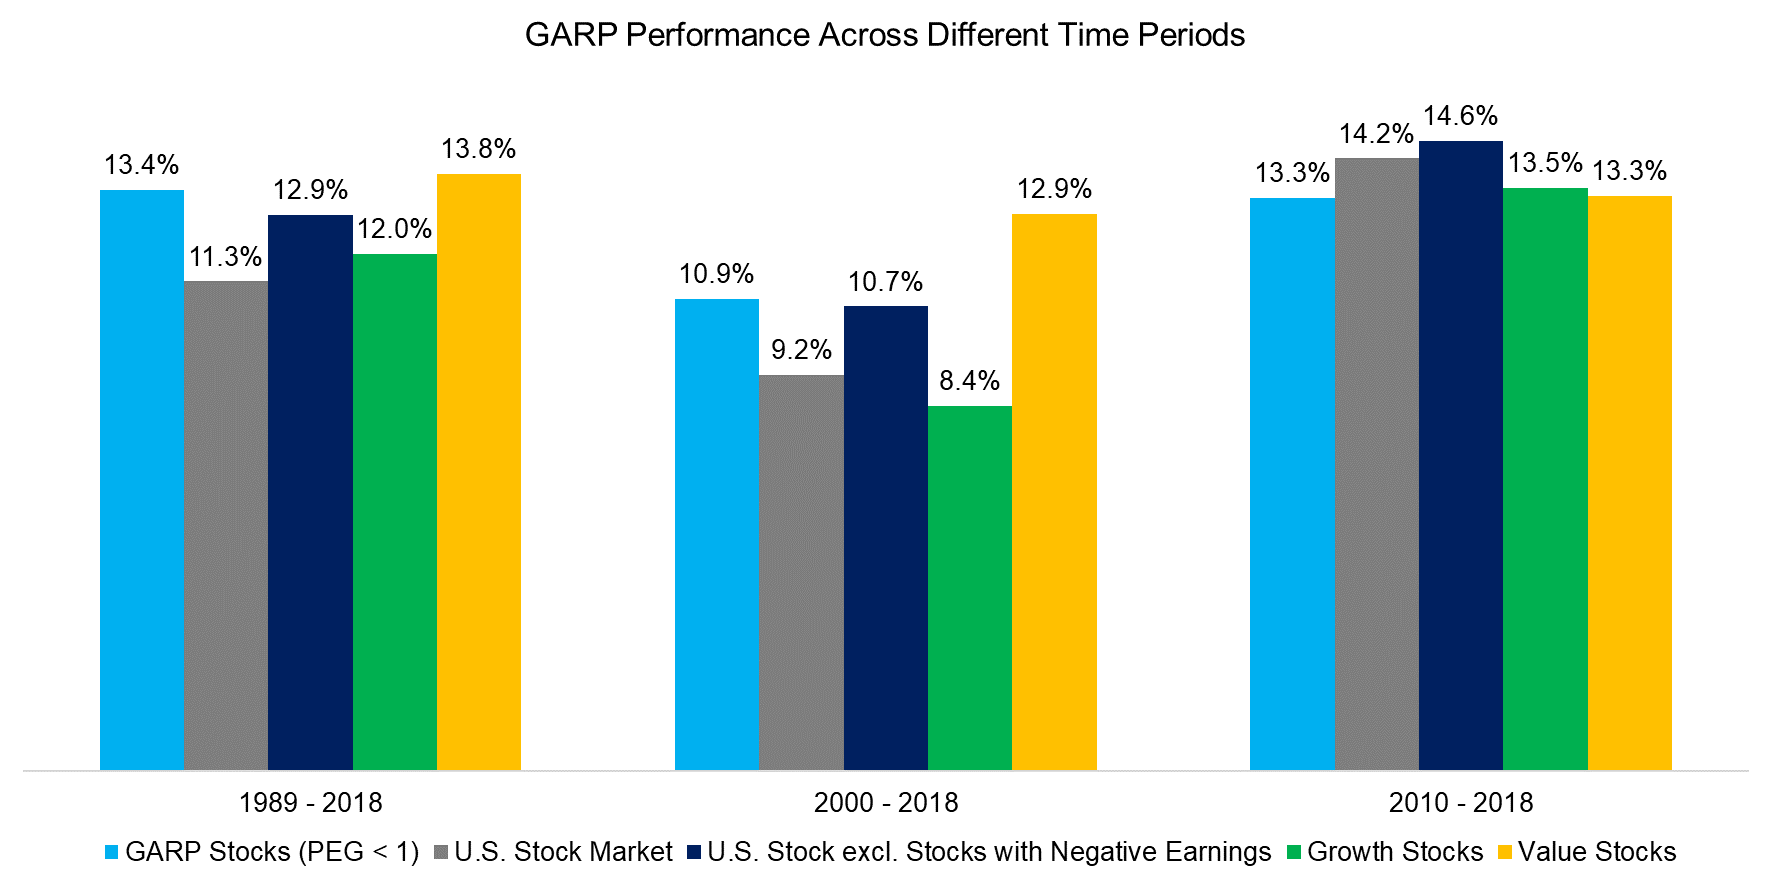 GARP Performance Across Different Time Periods